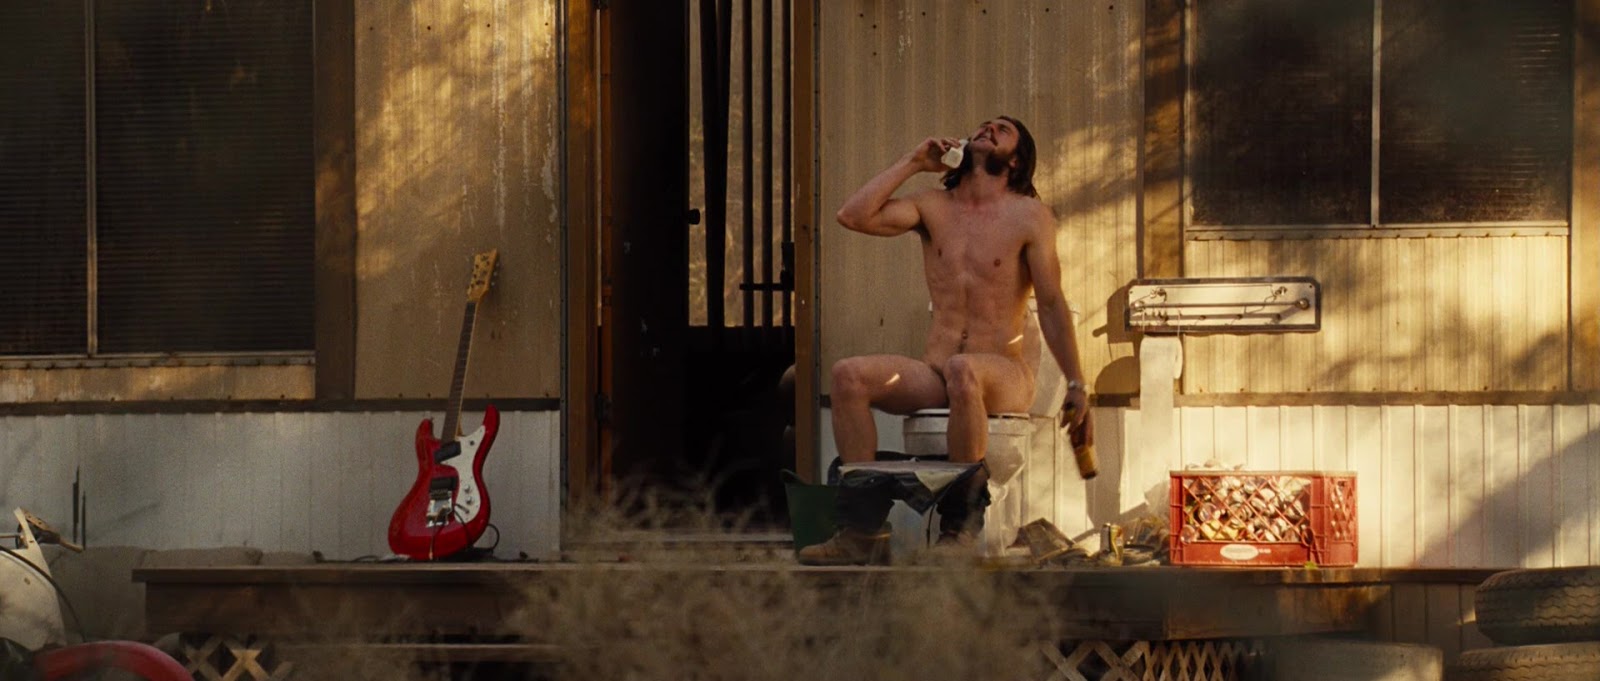 Aaron Taylor-Johnson nude in Nocturnal Animals.